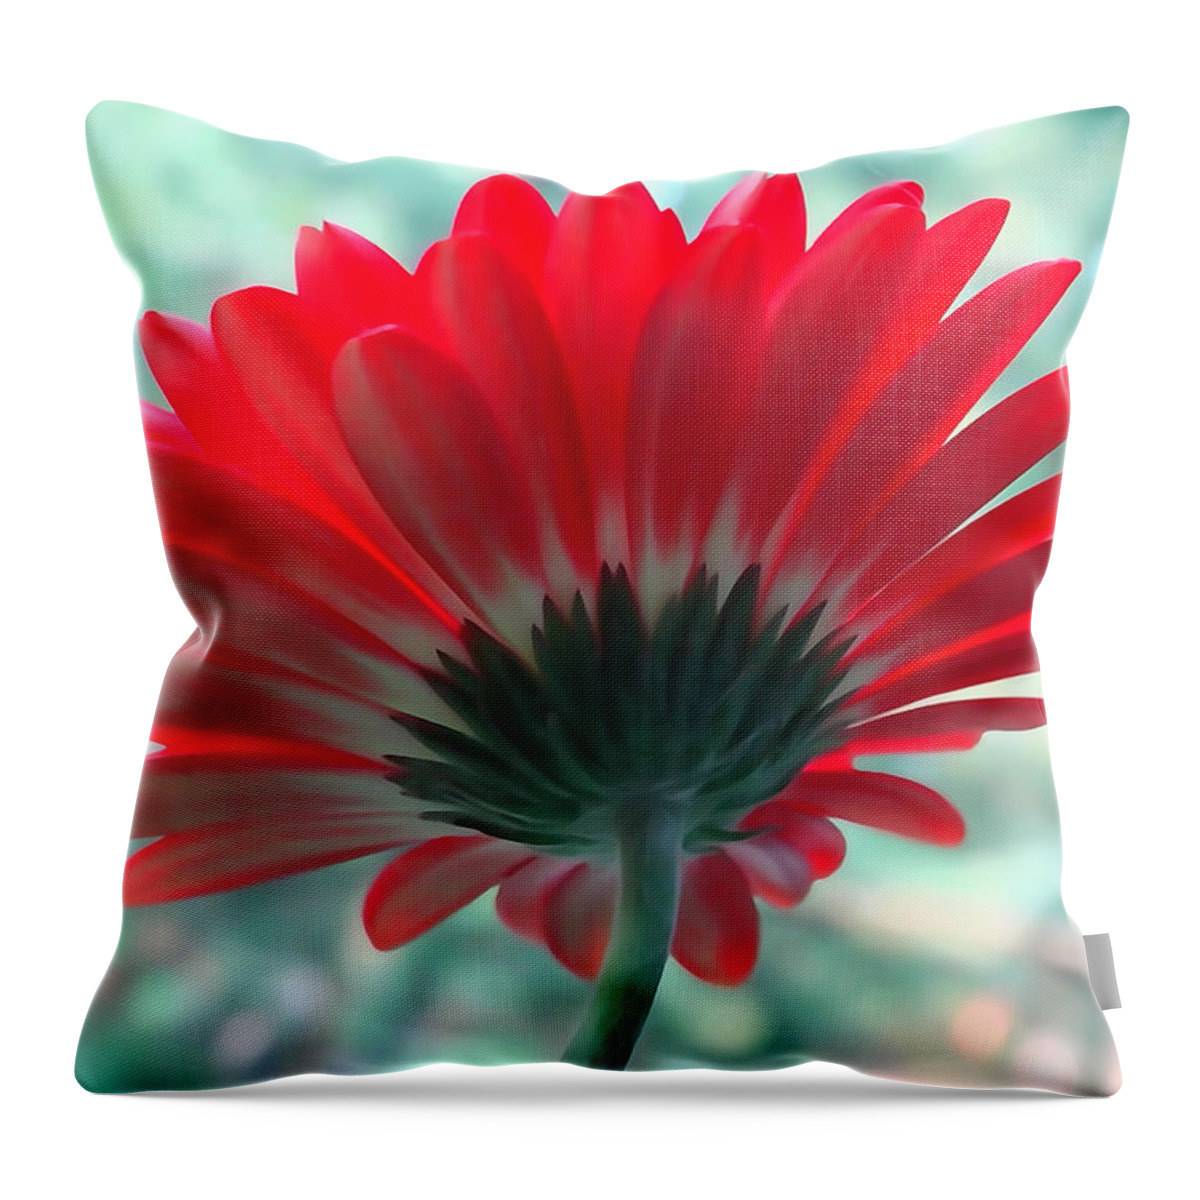 Backside Throw Pillow featuring the photograph Red Petals by David T Wilkinson